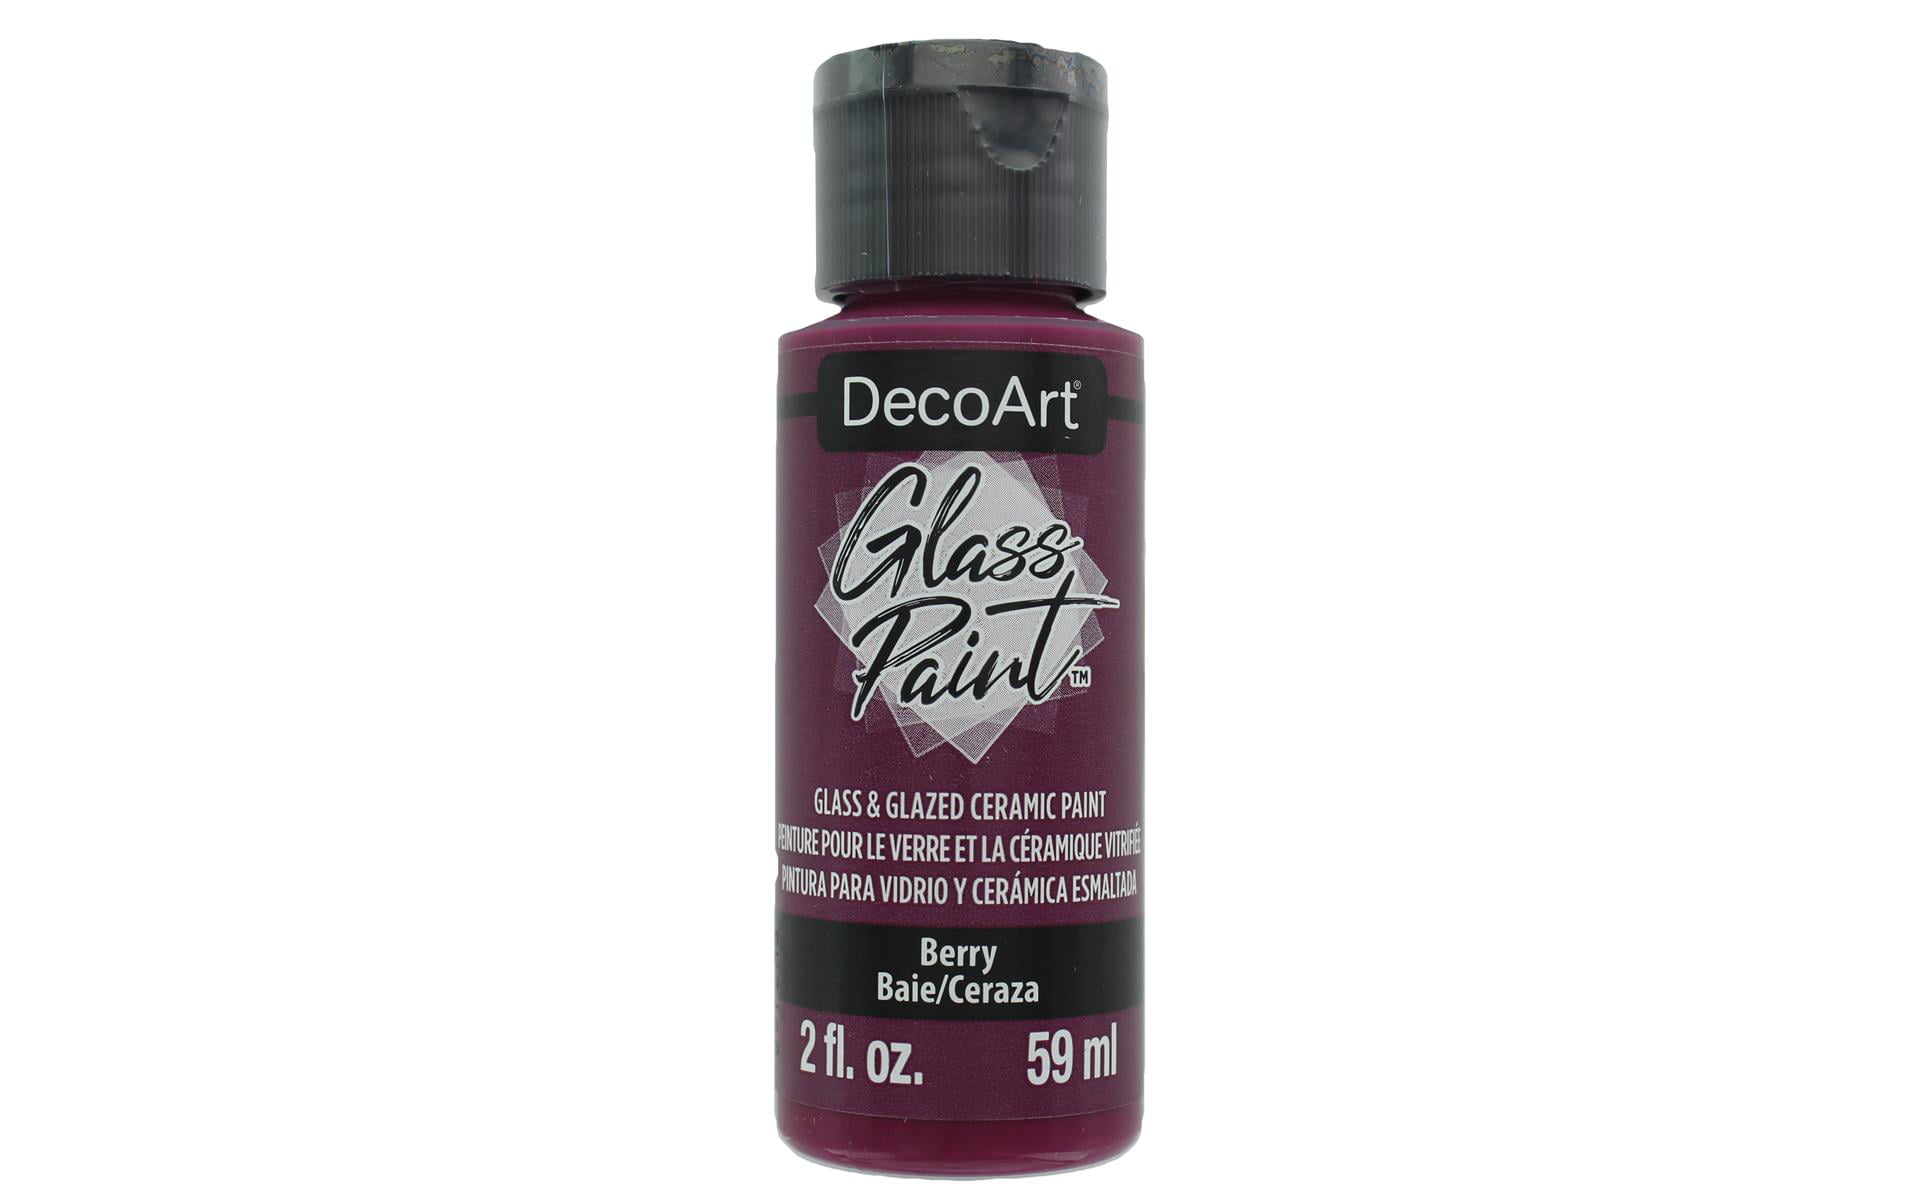 Decoart Clear Pouring Topcoat - 16 oz